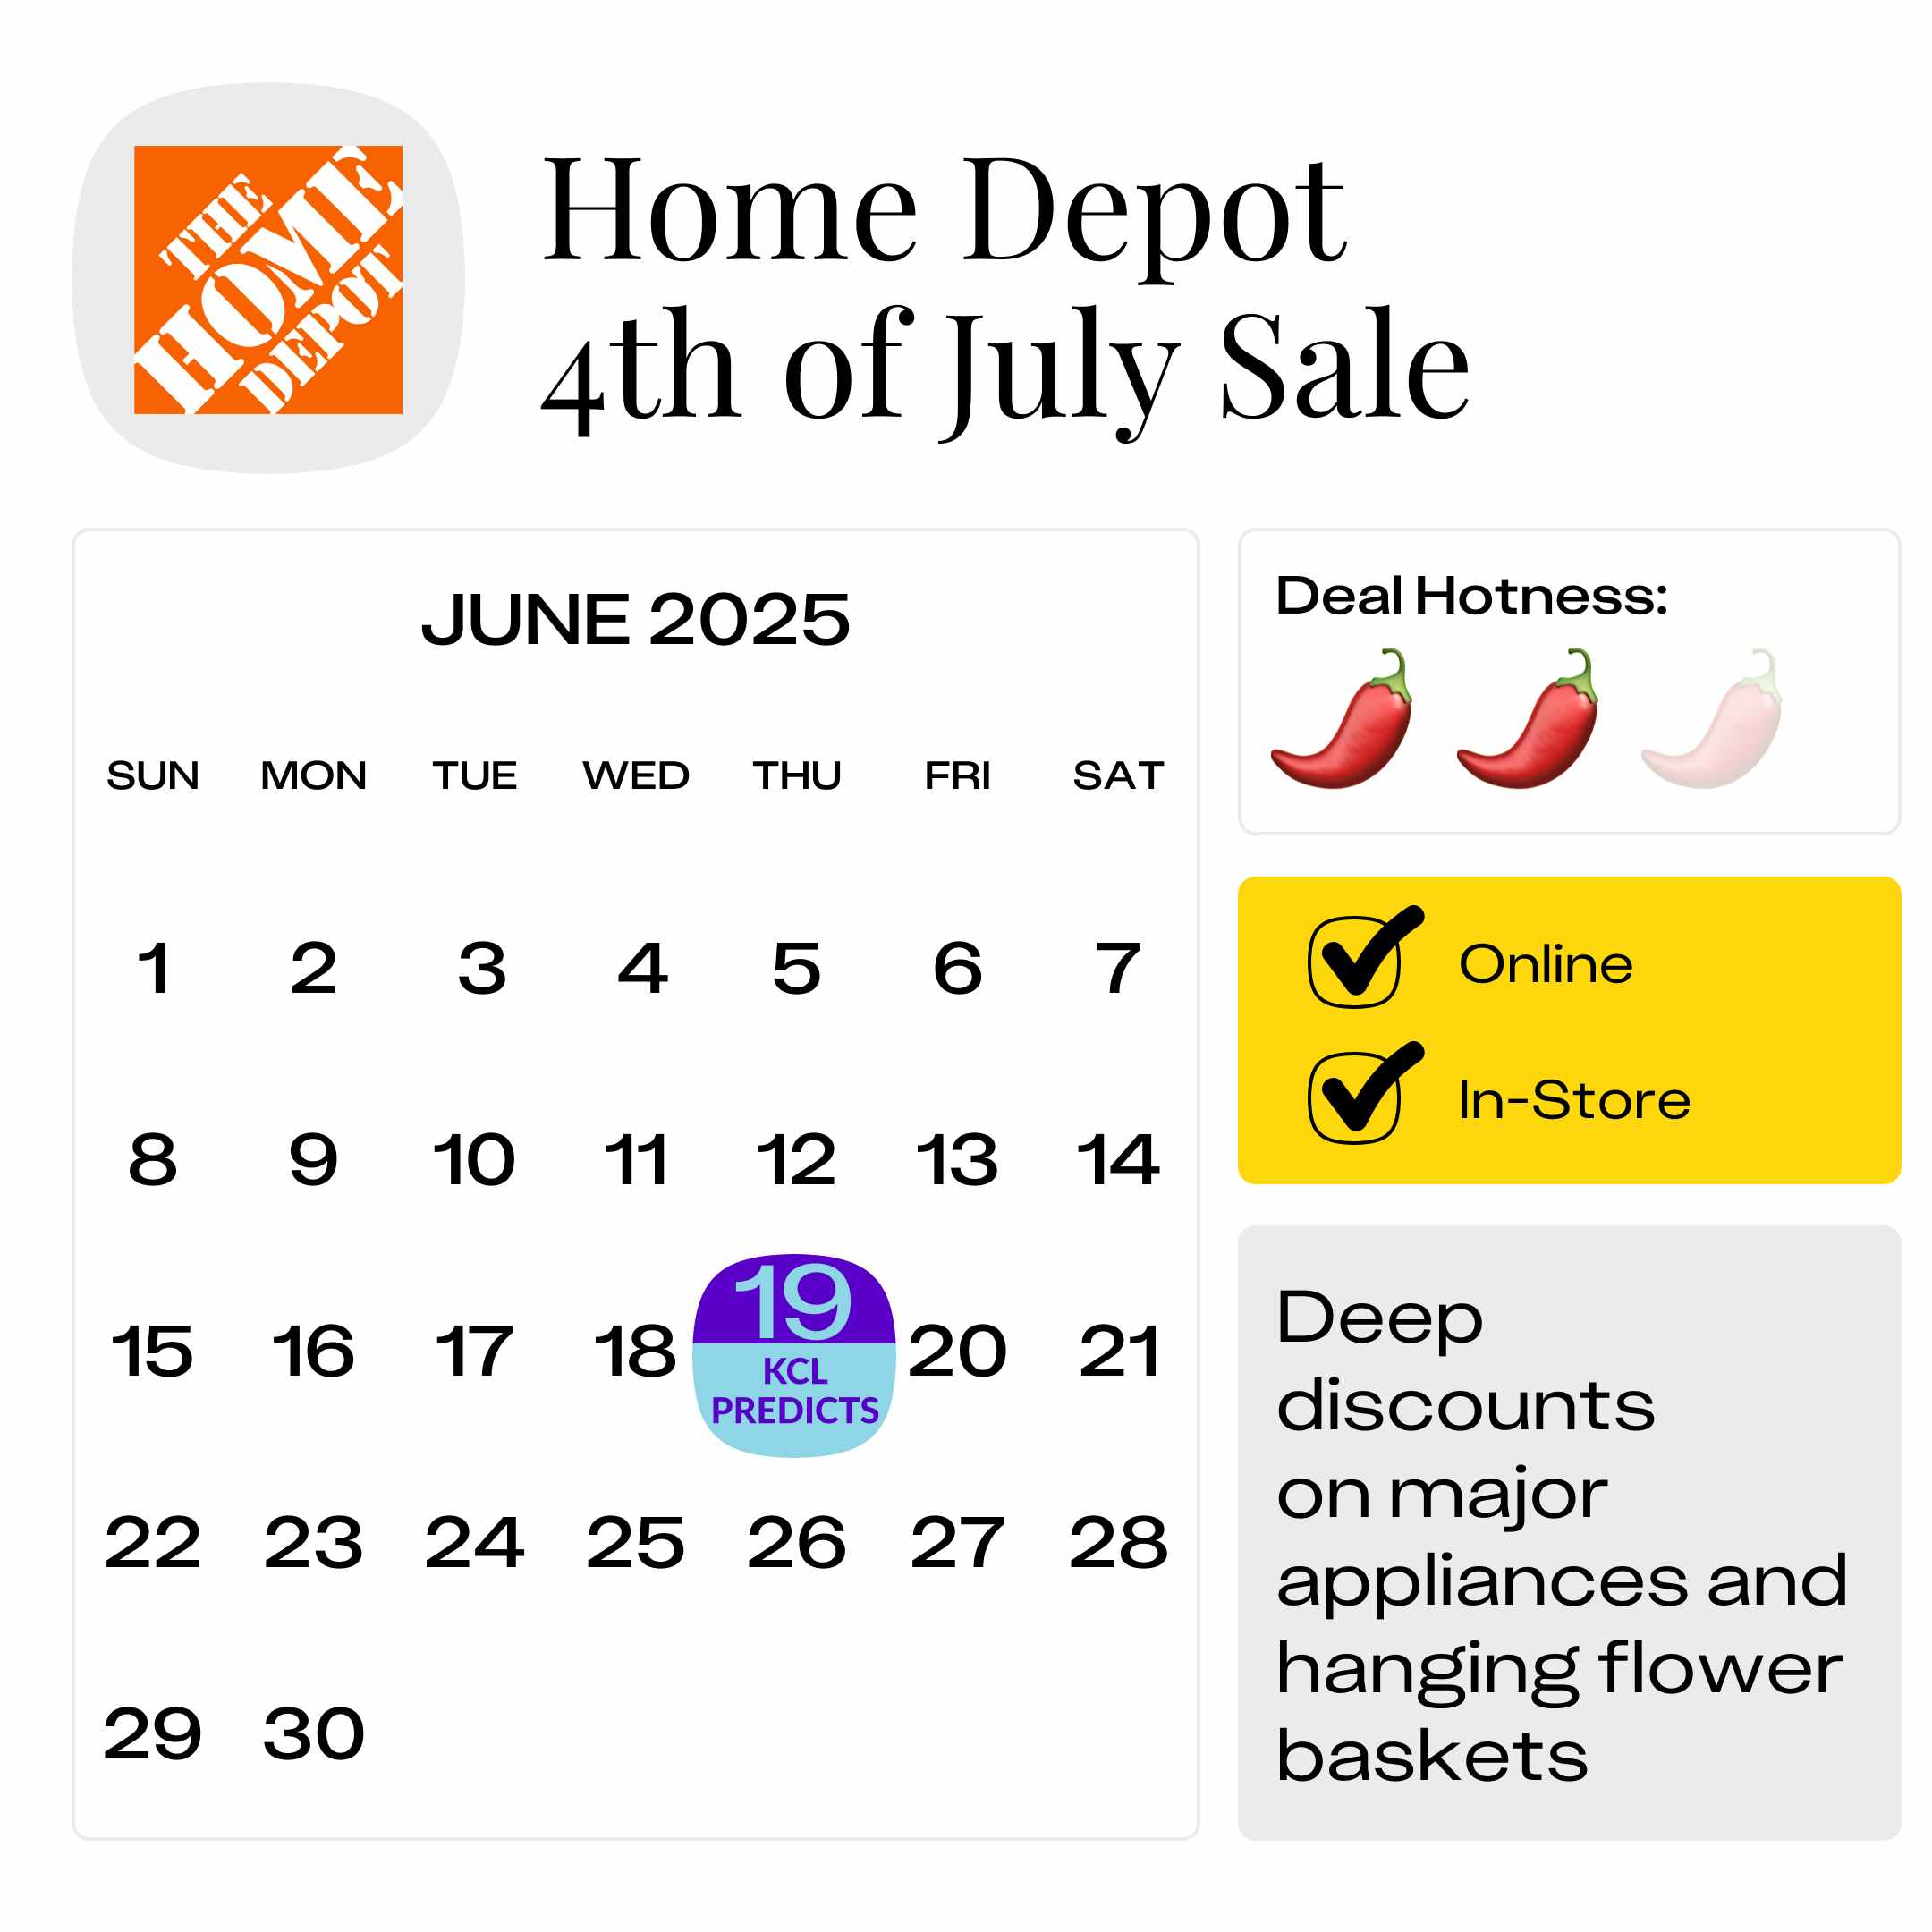 Home-Depot-4th-of-July-Sale